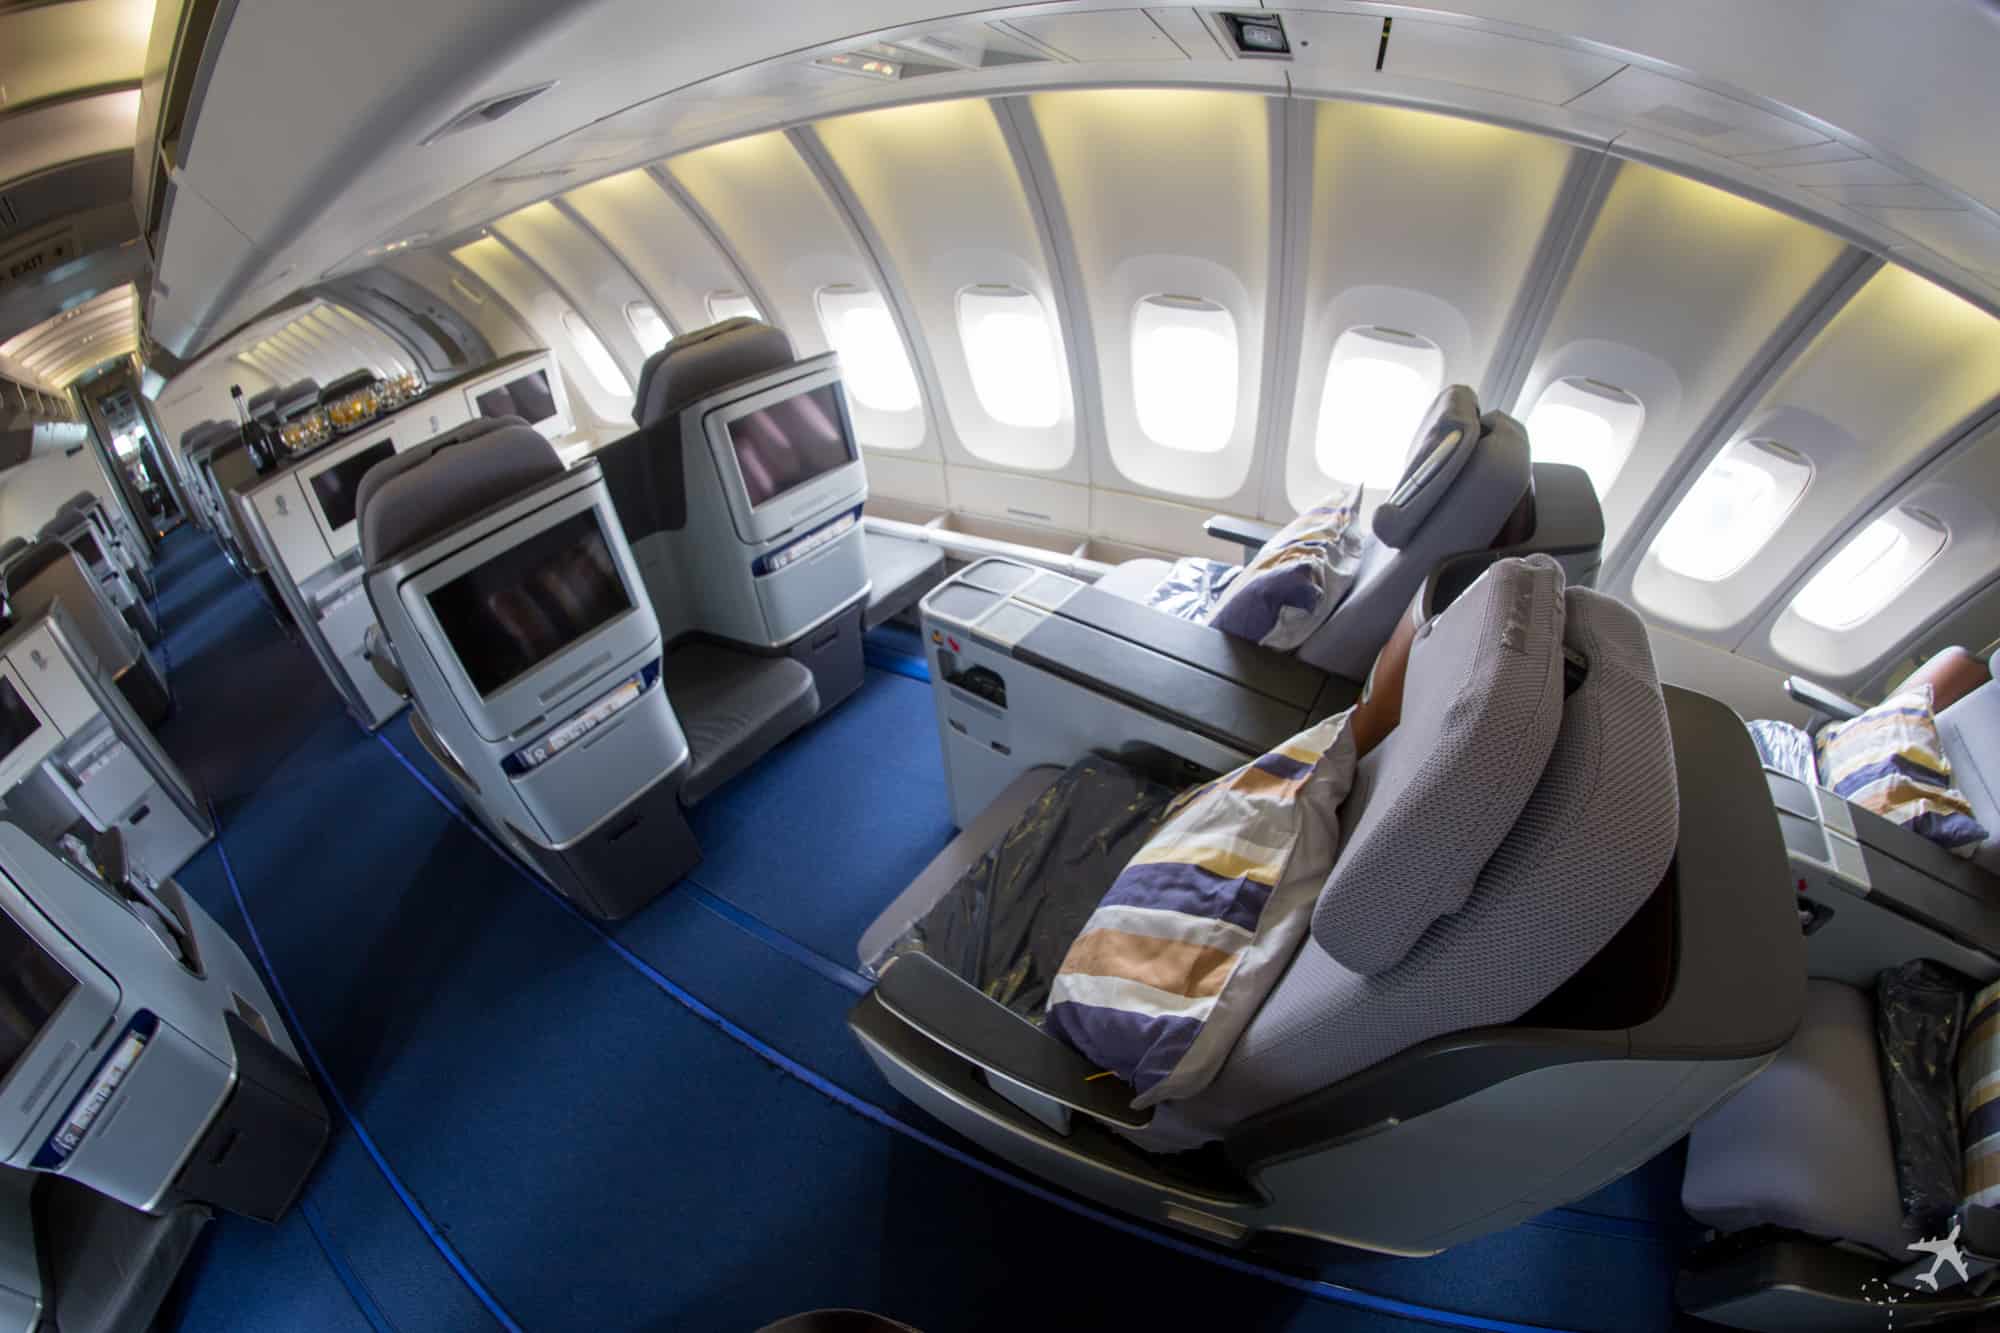 Lufthansa Business Class in the Airbus A320-200 to Munich (Trip